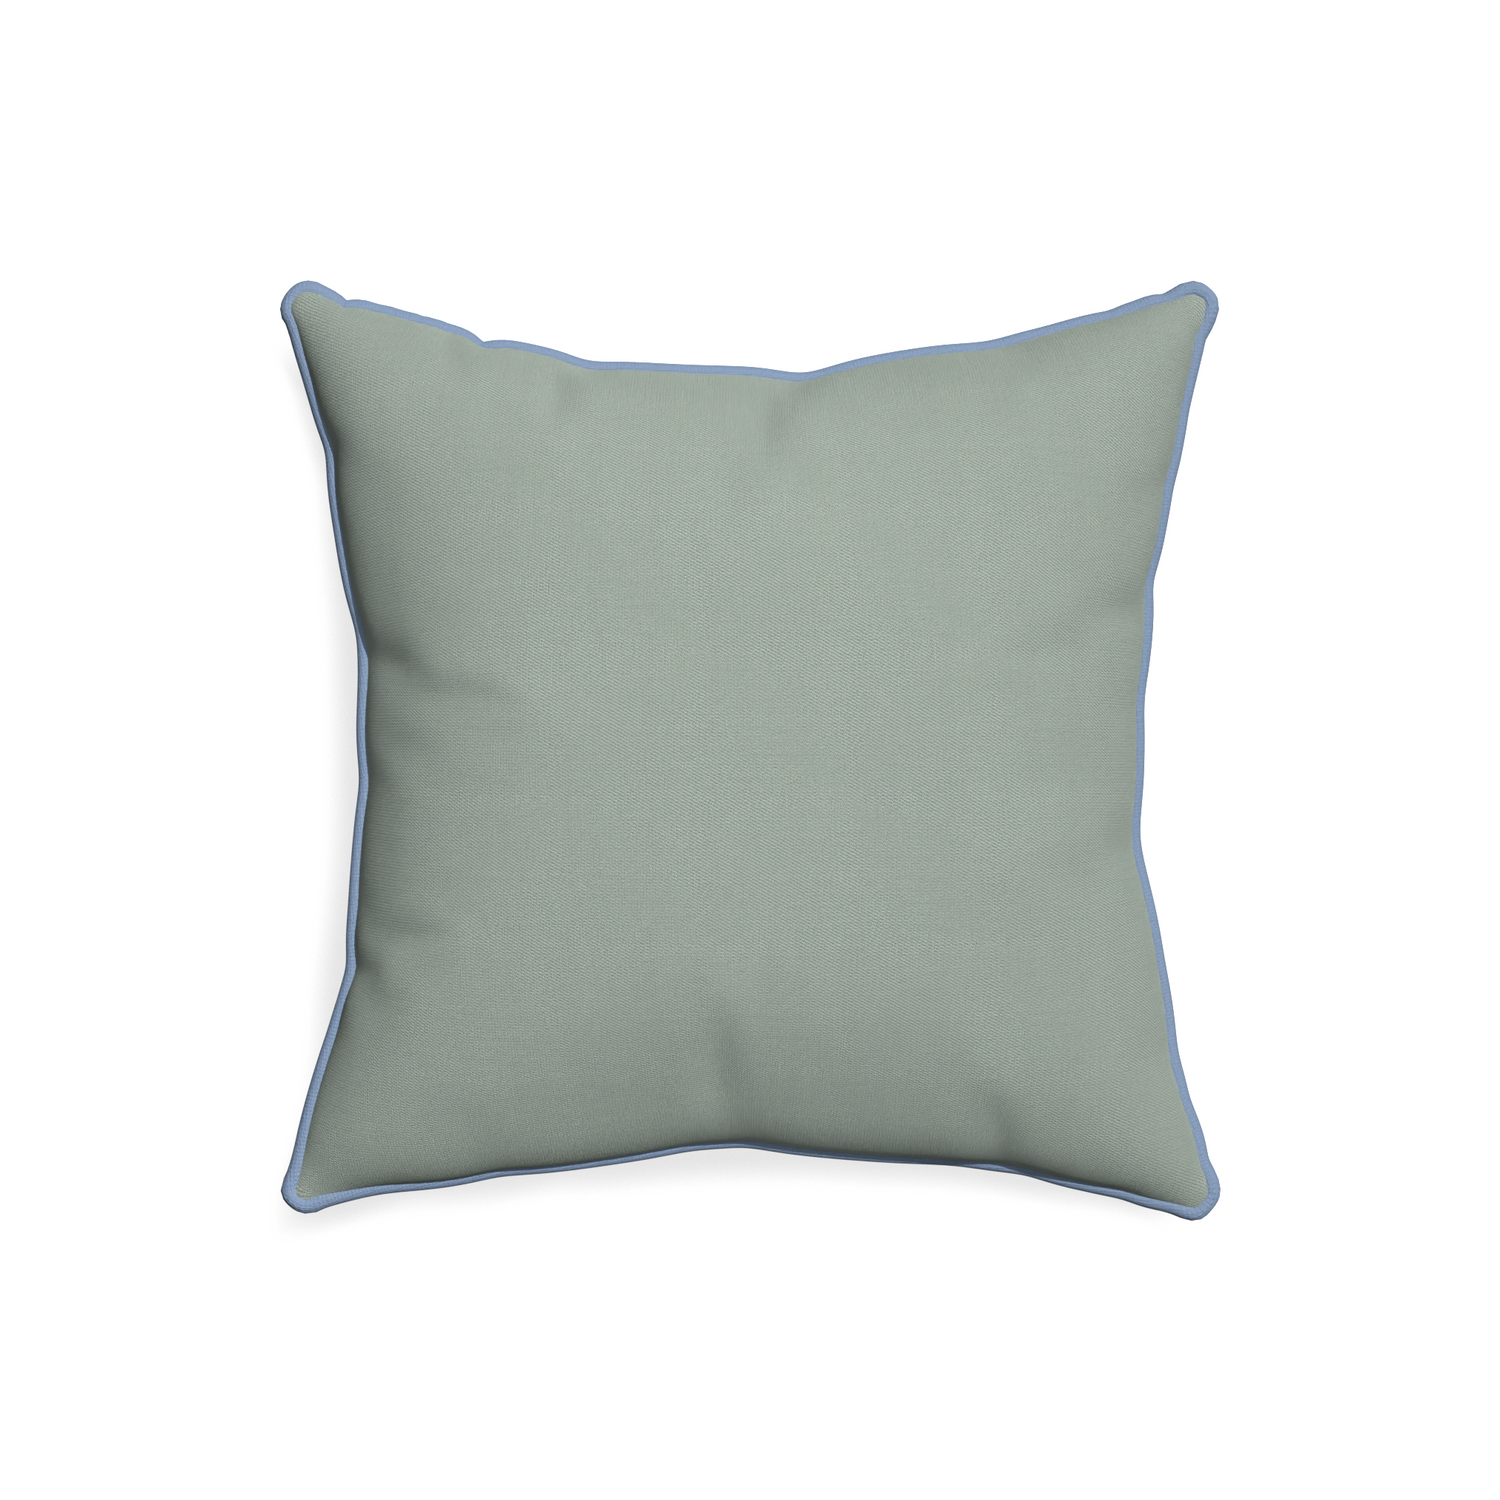 20-square sage custom sage green cottonpillow with sky piping on white background